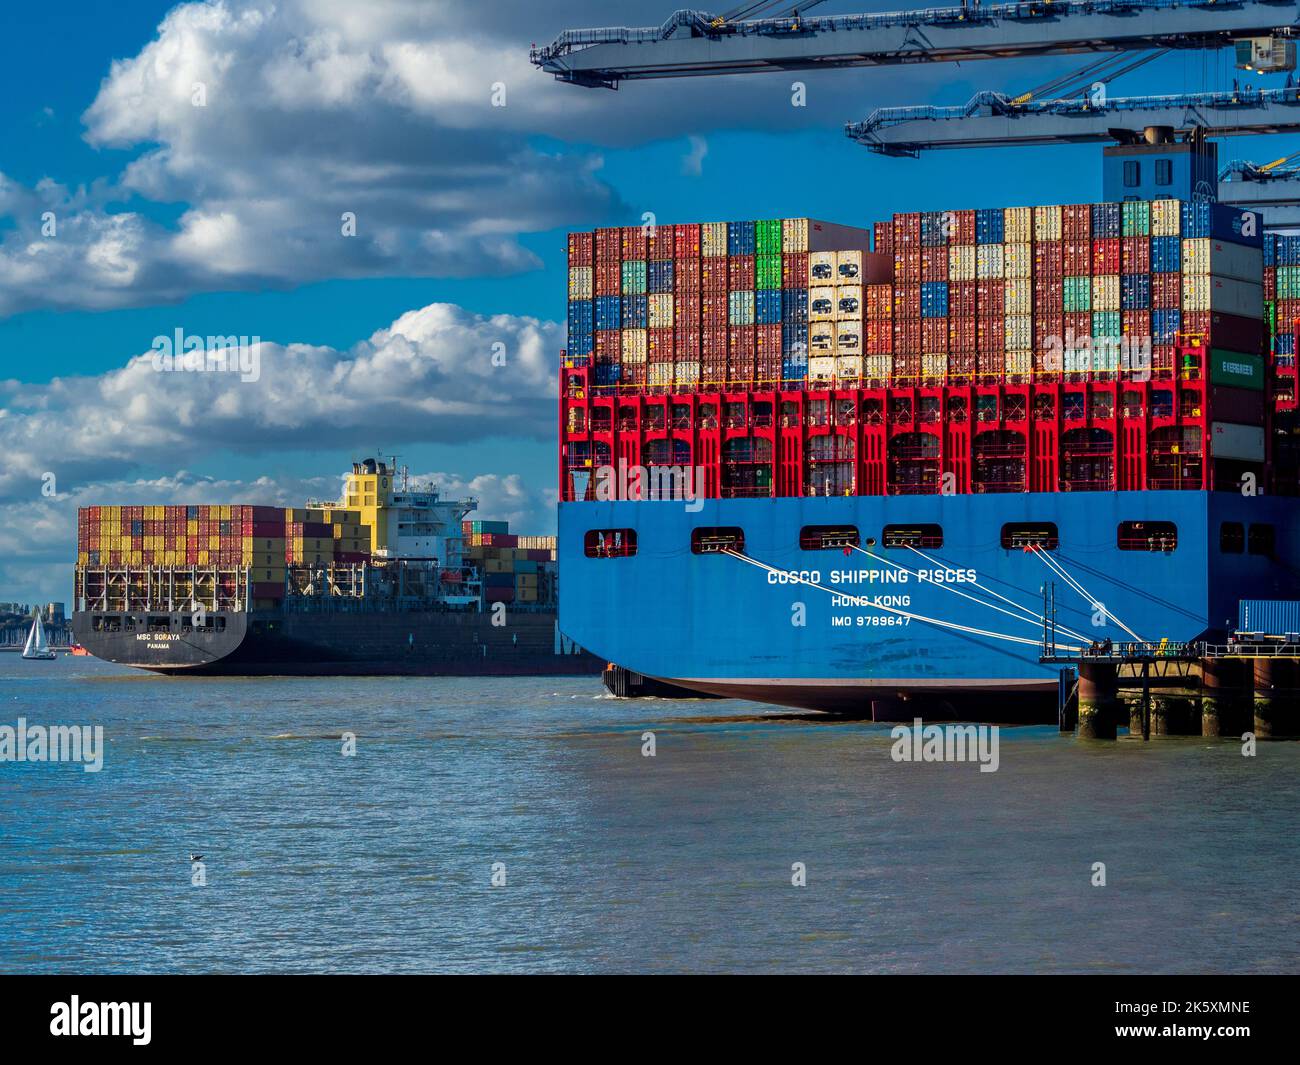 British Trade - Container Ships arriving and unloading at Felixstowe Port, the UK's largest Container port. Stock Photo